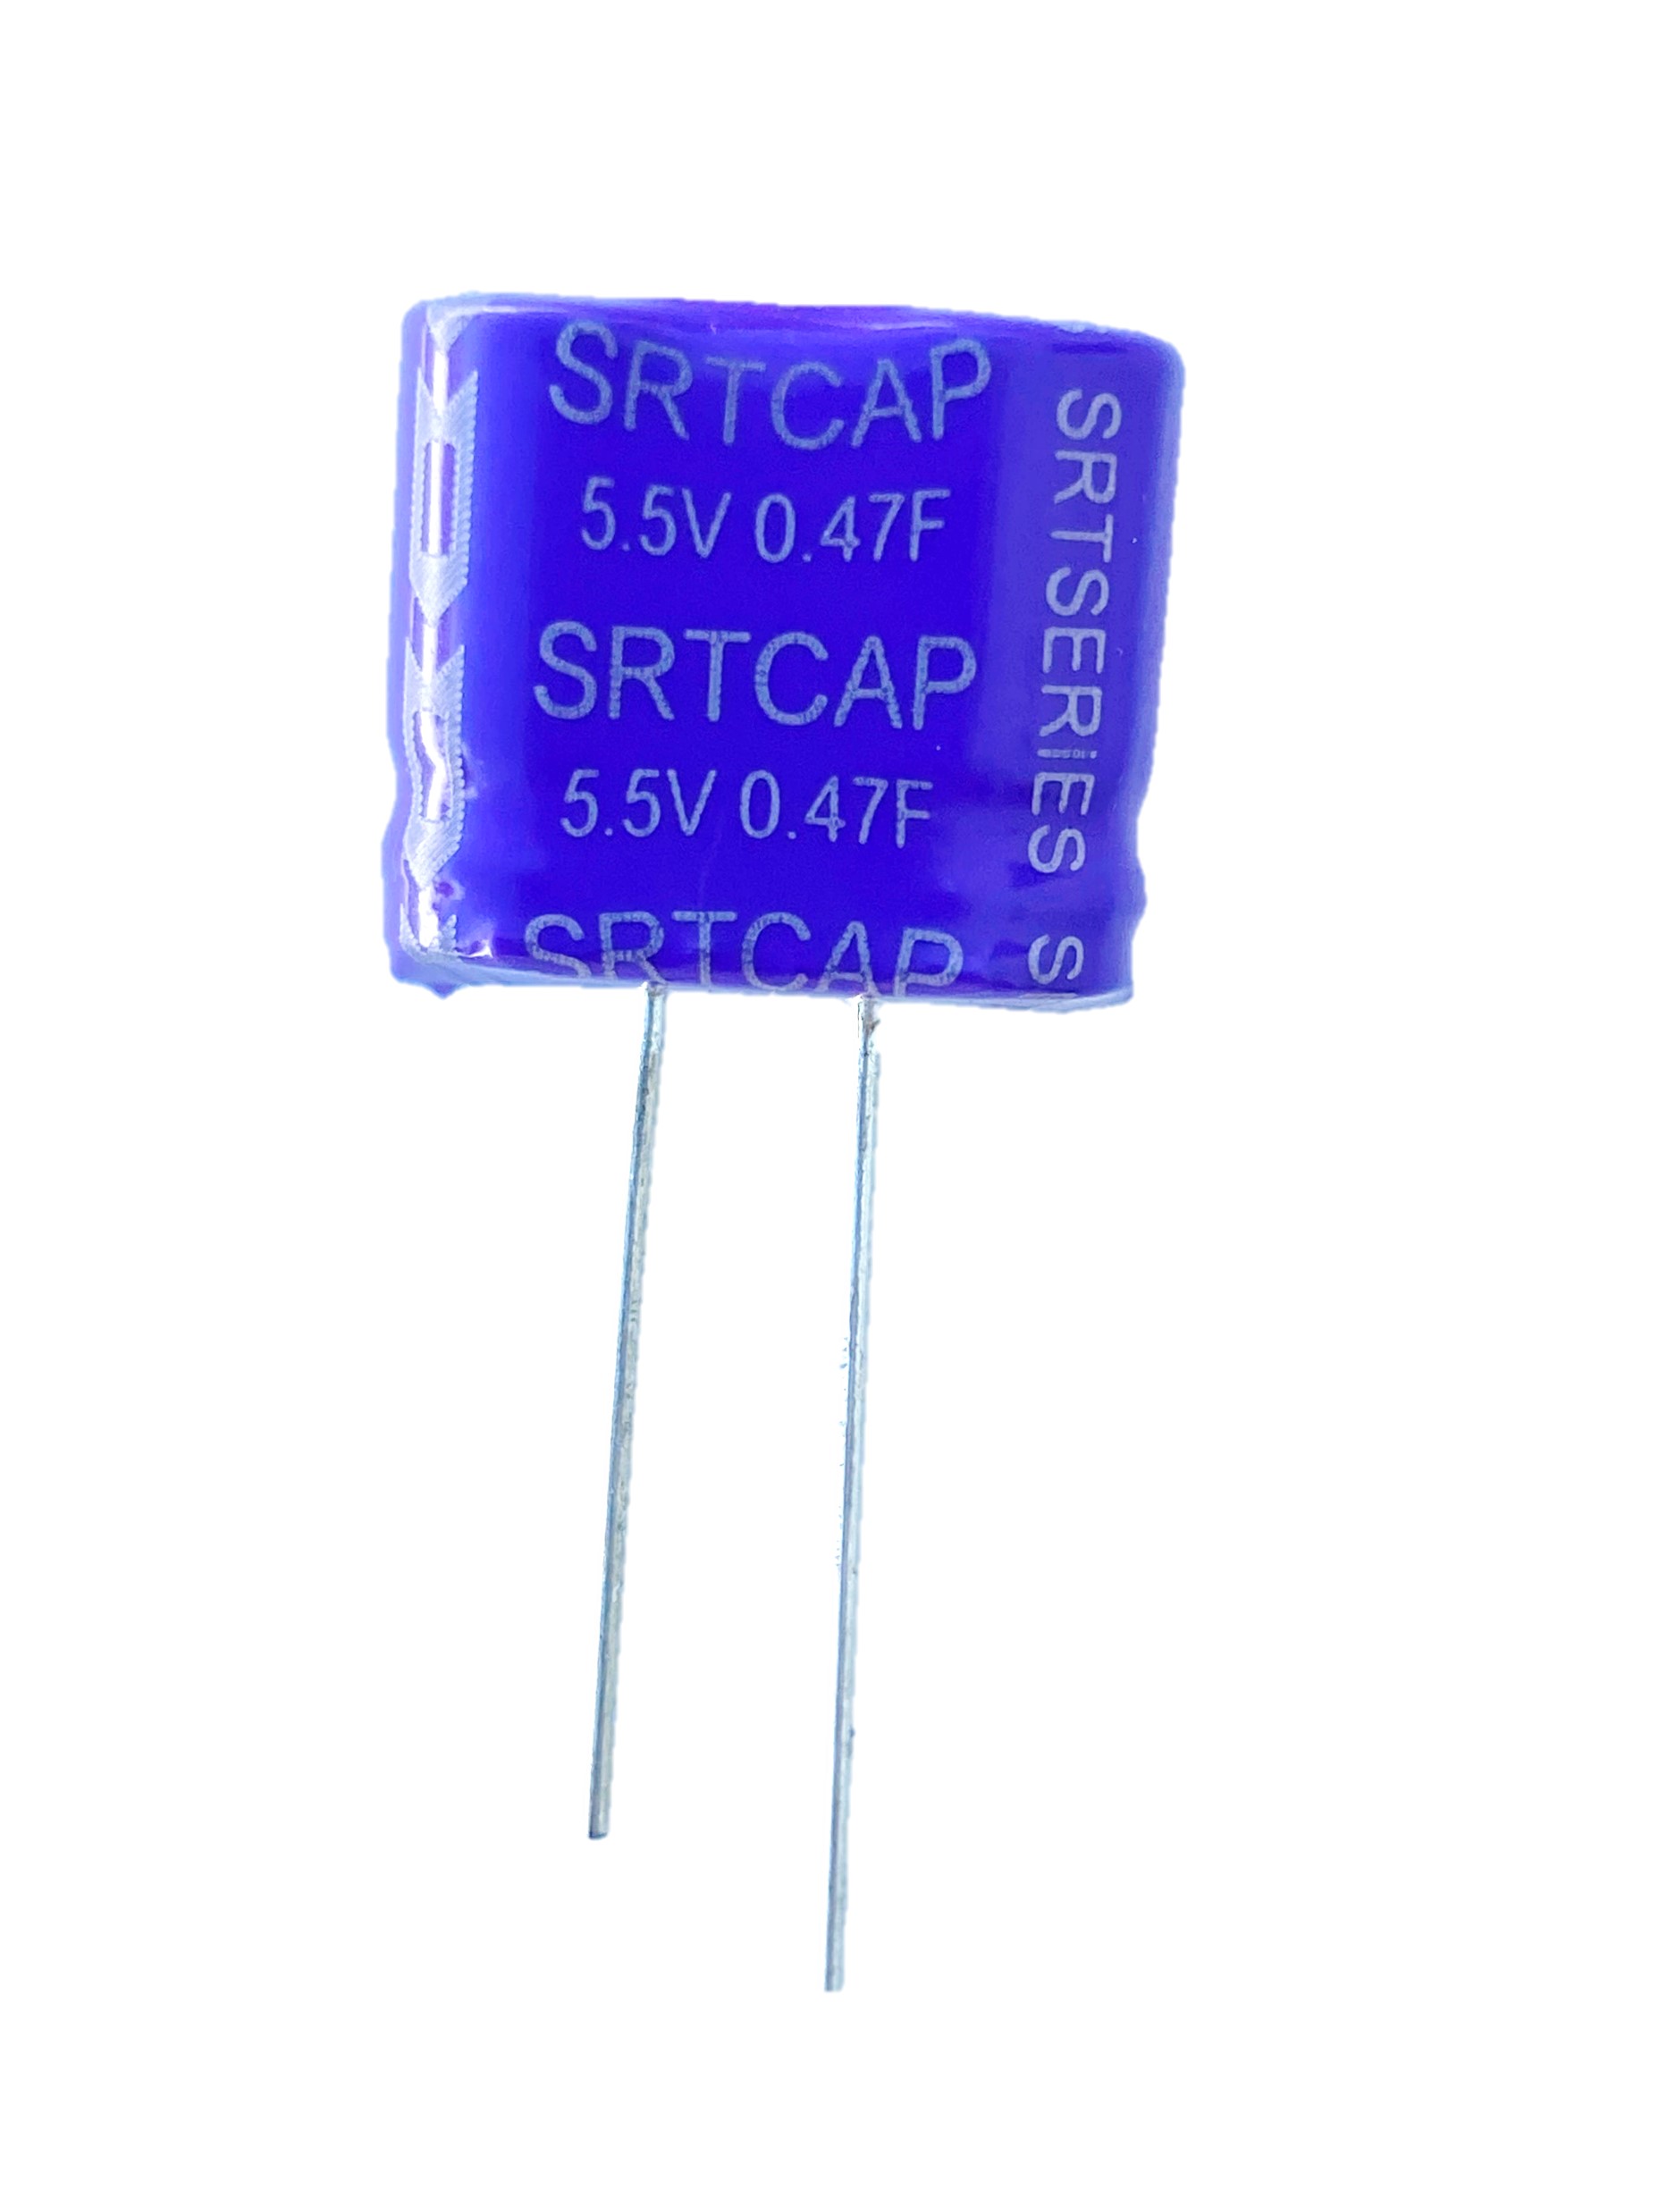 the part number is SCM5R5474A